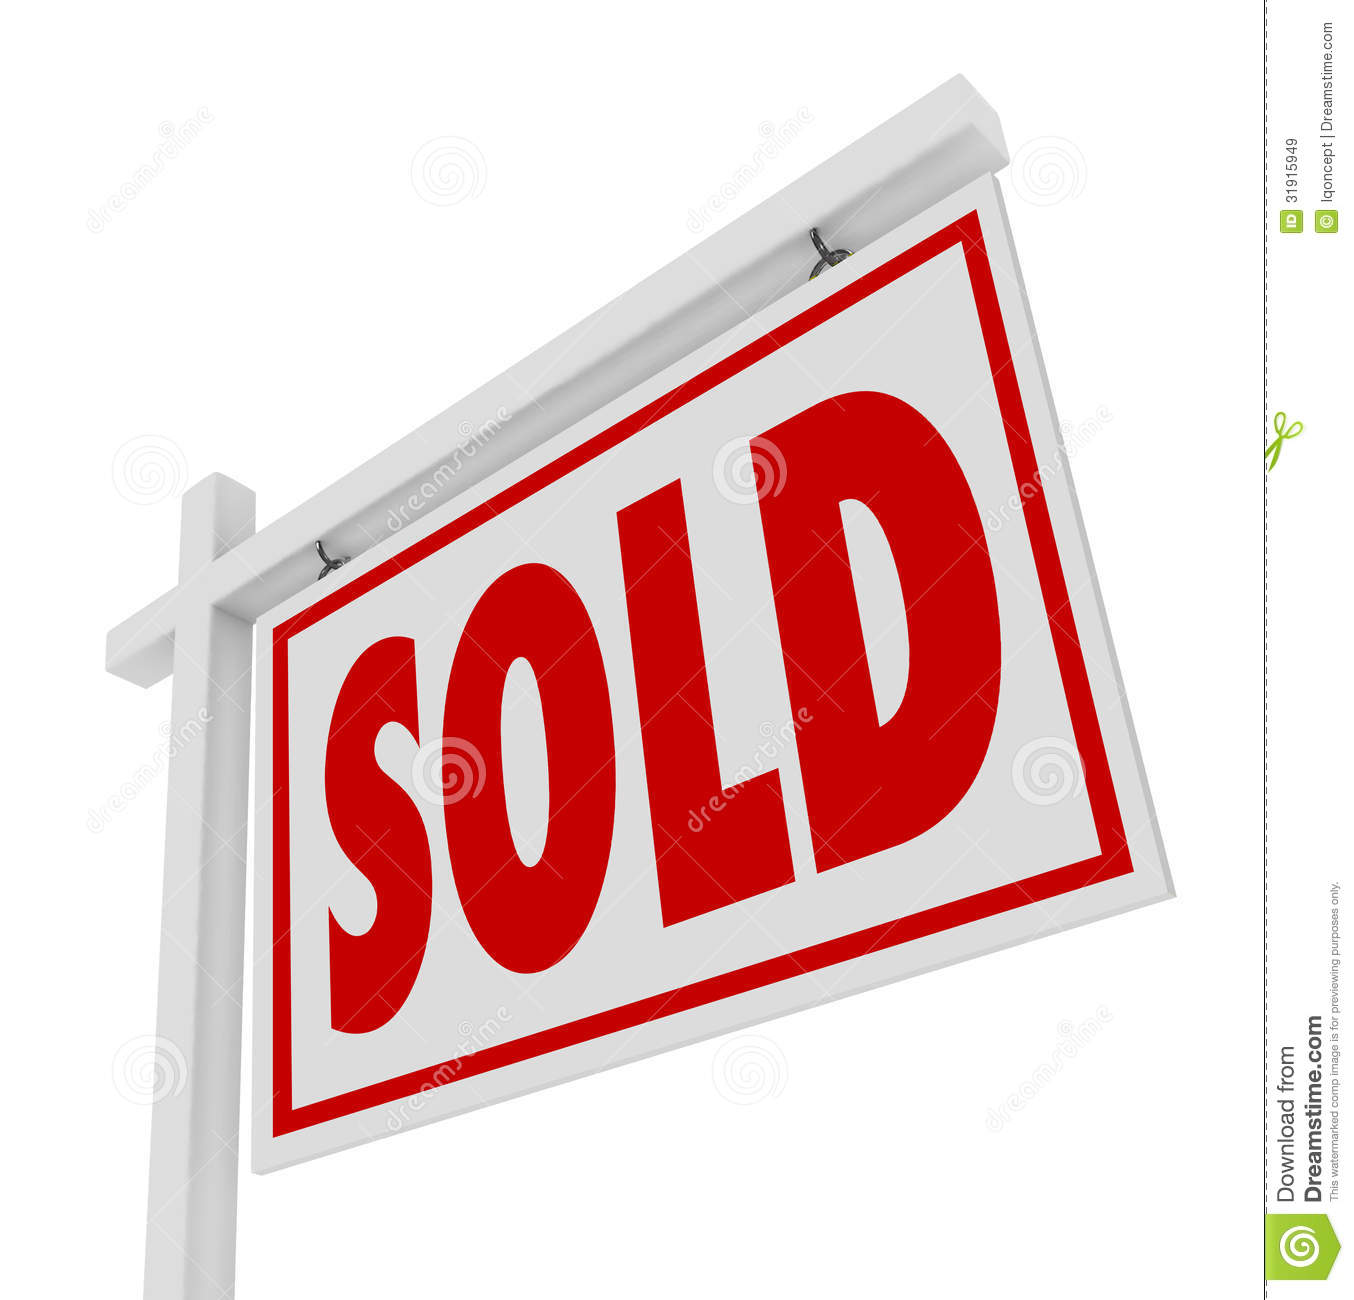 Sold For Sale Home Real Estate Sign Closed Deal Royalty Free Stock